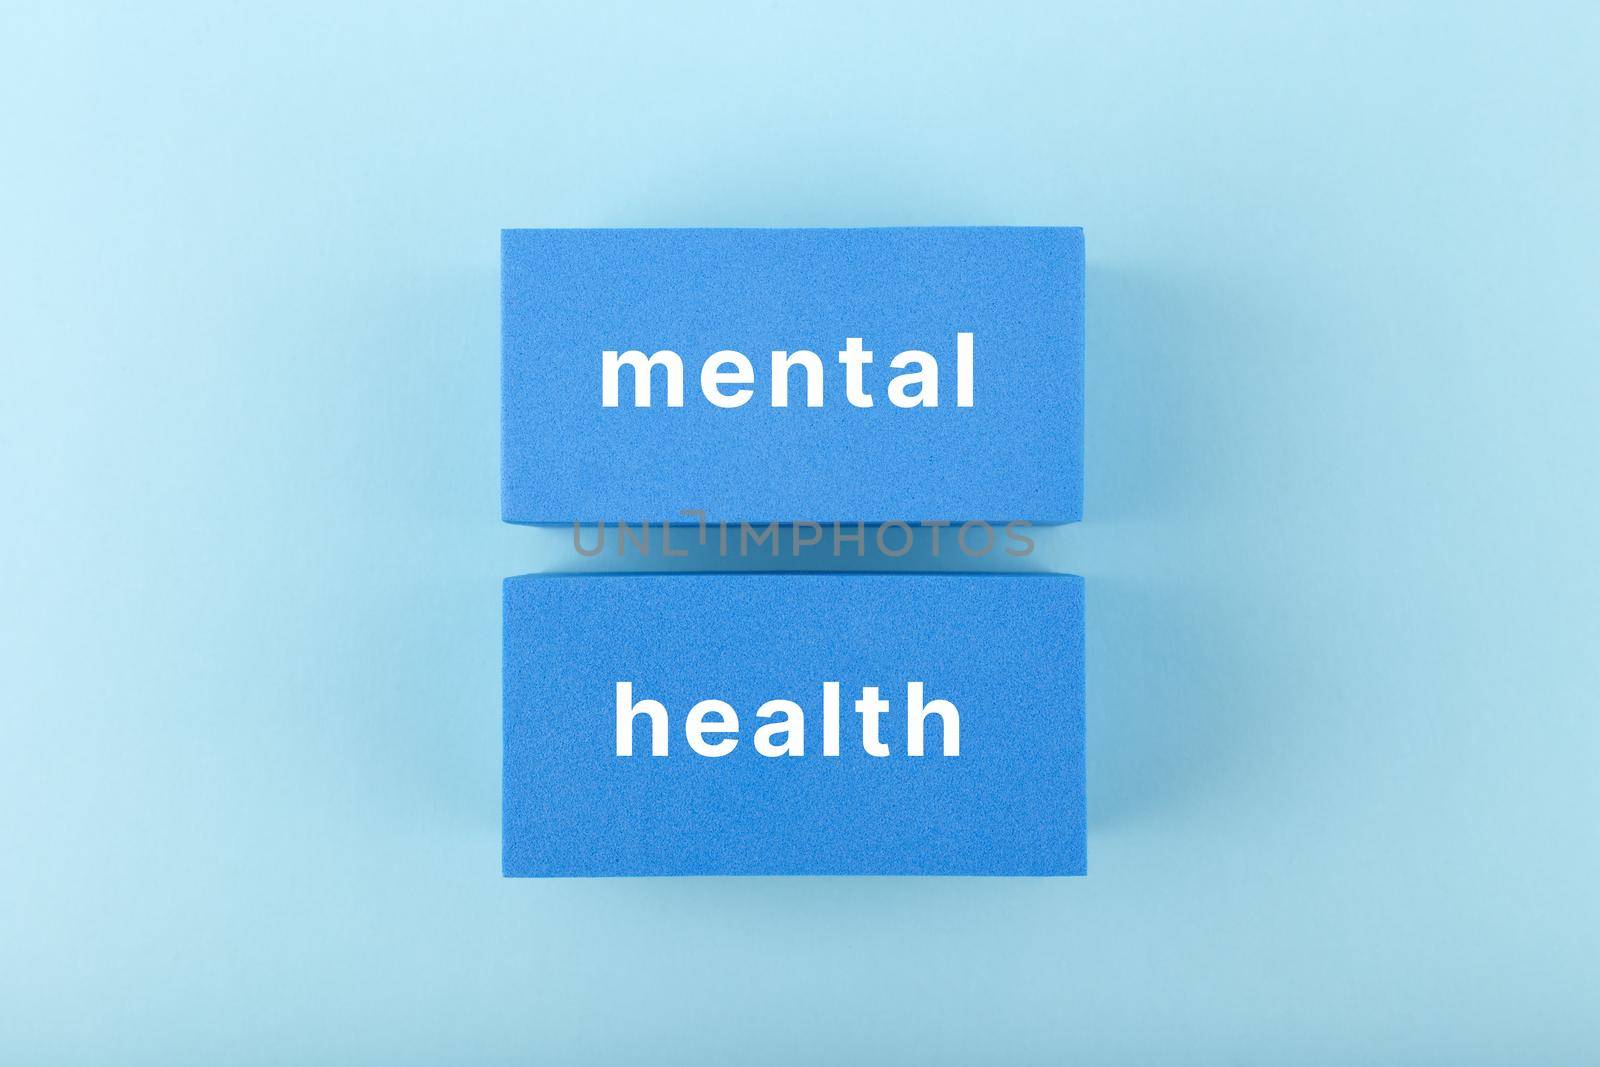 Mental health text written on dark blue rectangles in the middle of bright blue background by Senorina_Irina